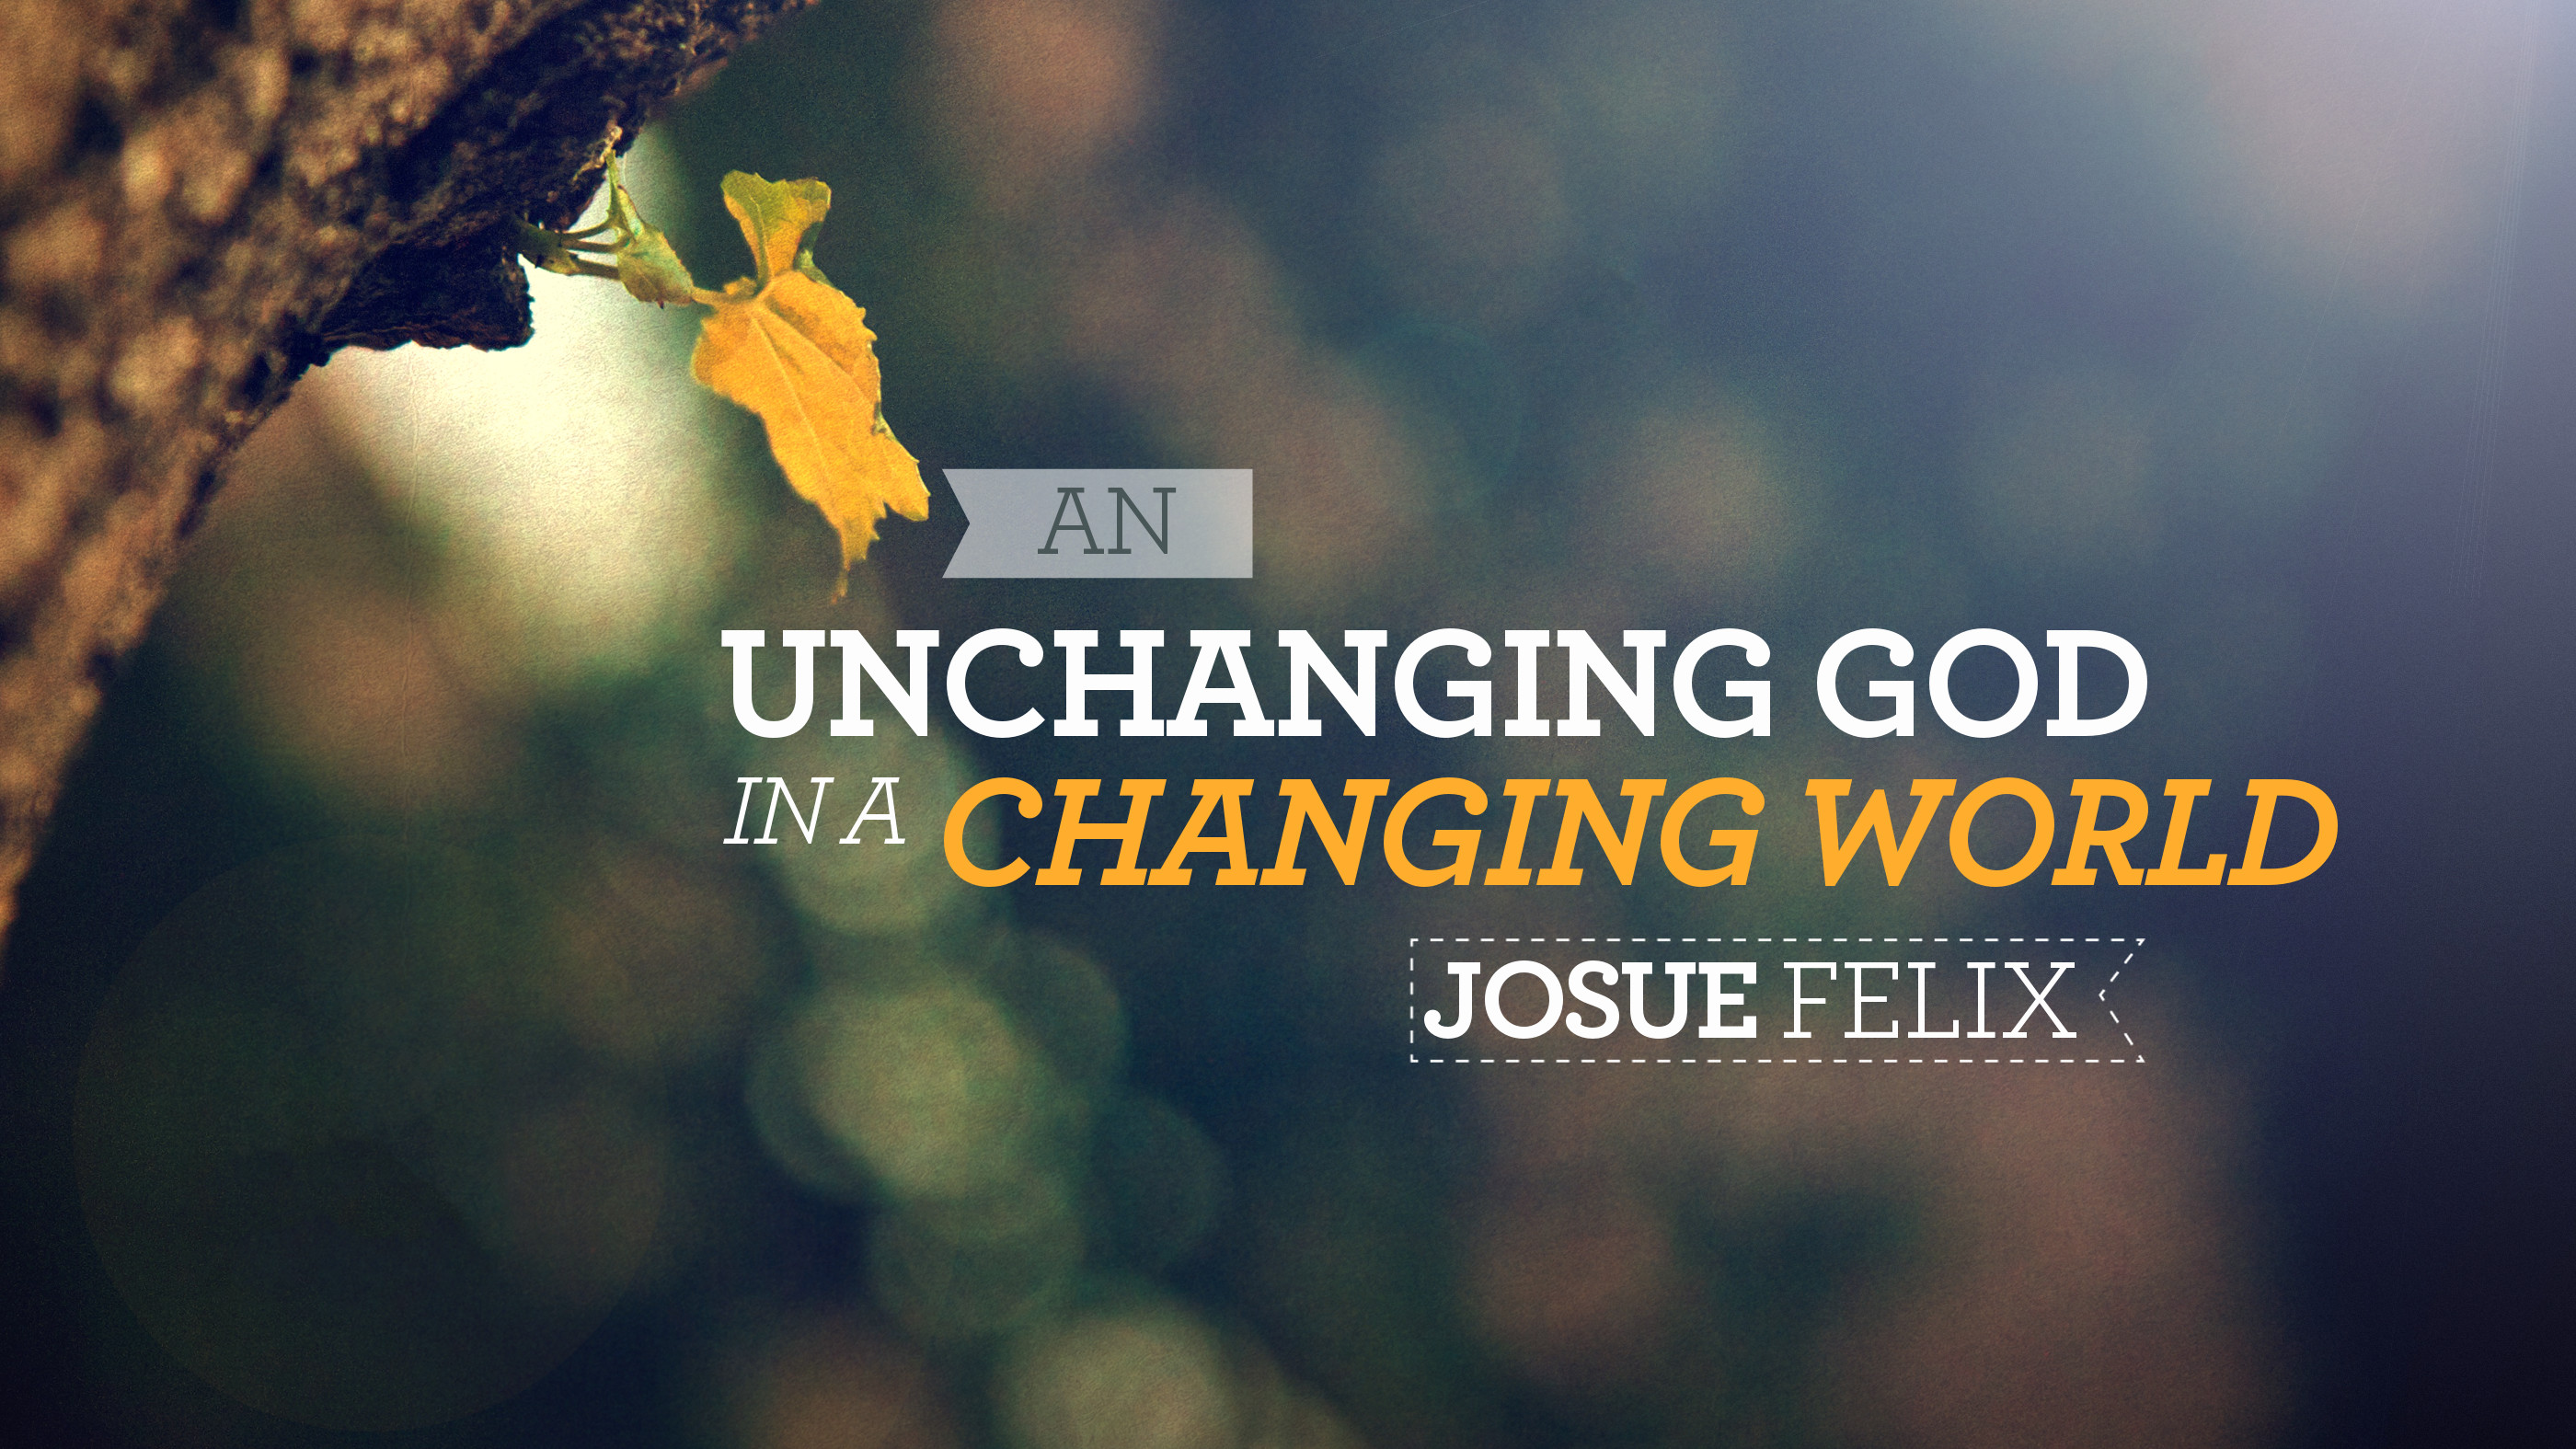 An Unchanging God in a Changing World